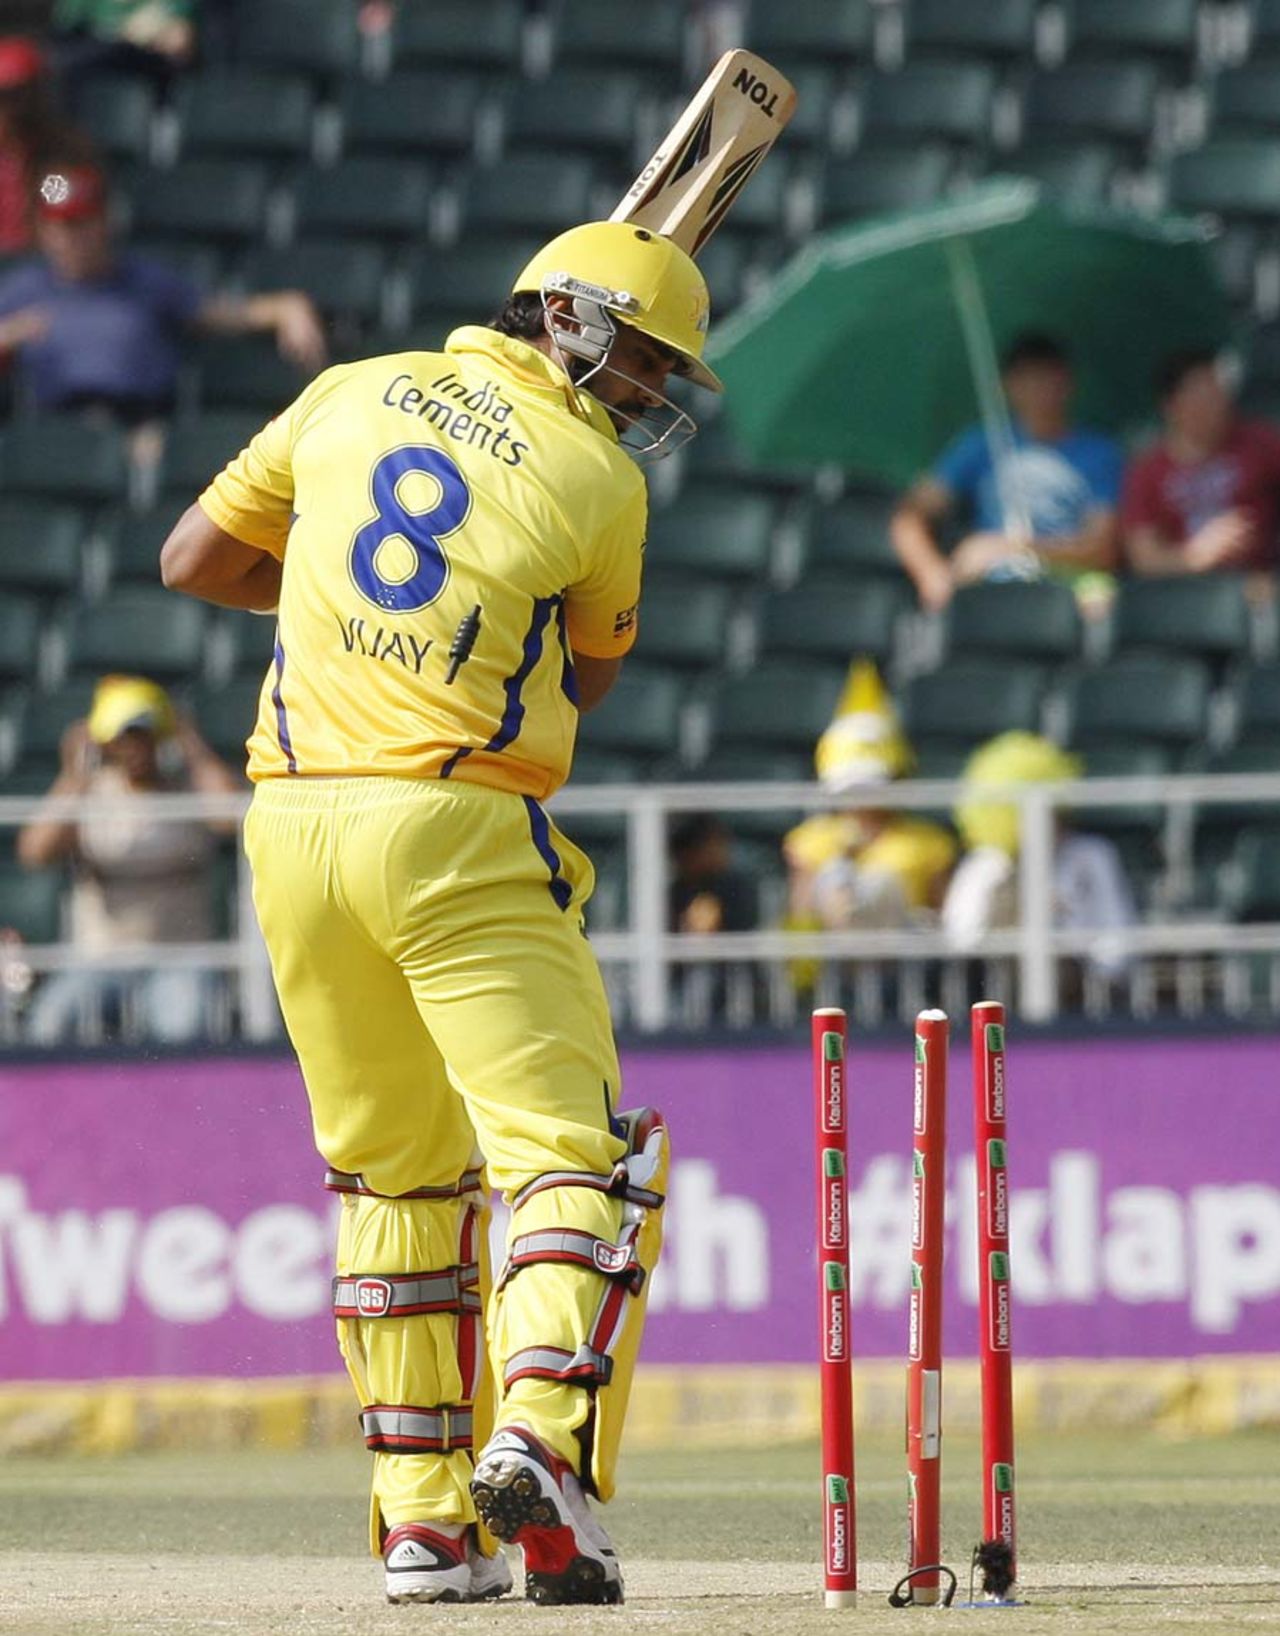 Murali Vijay was bowled off the second over of Chennai Super Kings' innings, Chennai Super Kings v Sydney Sixers, Group B, Champions League Twenty20, Johannesburg, October 14, 2012